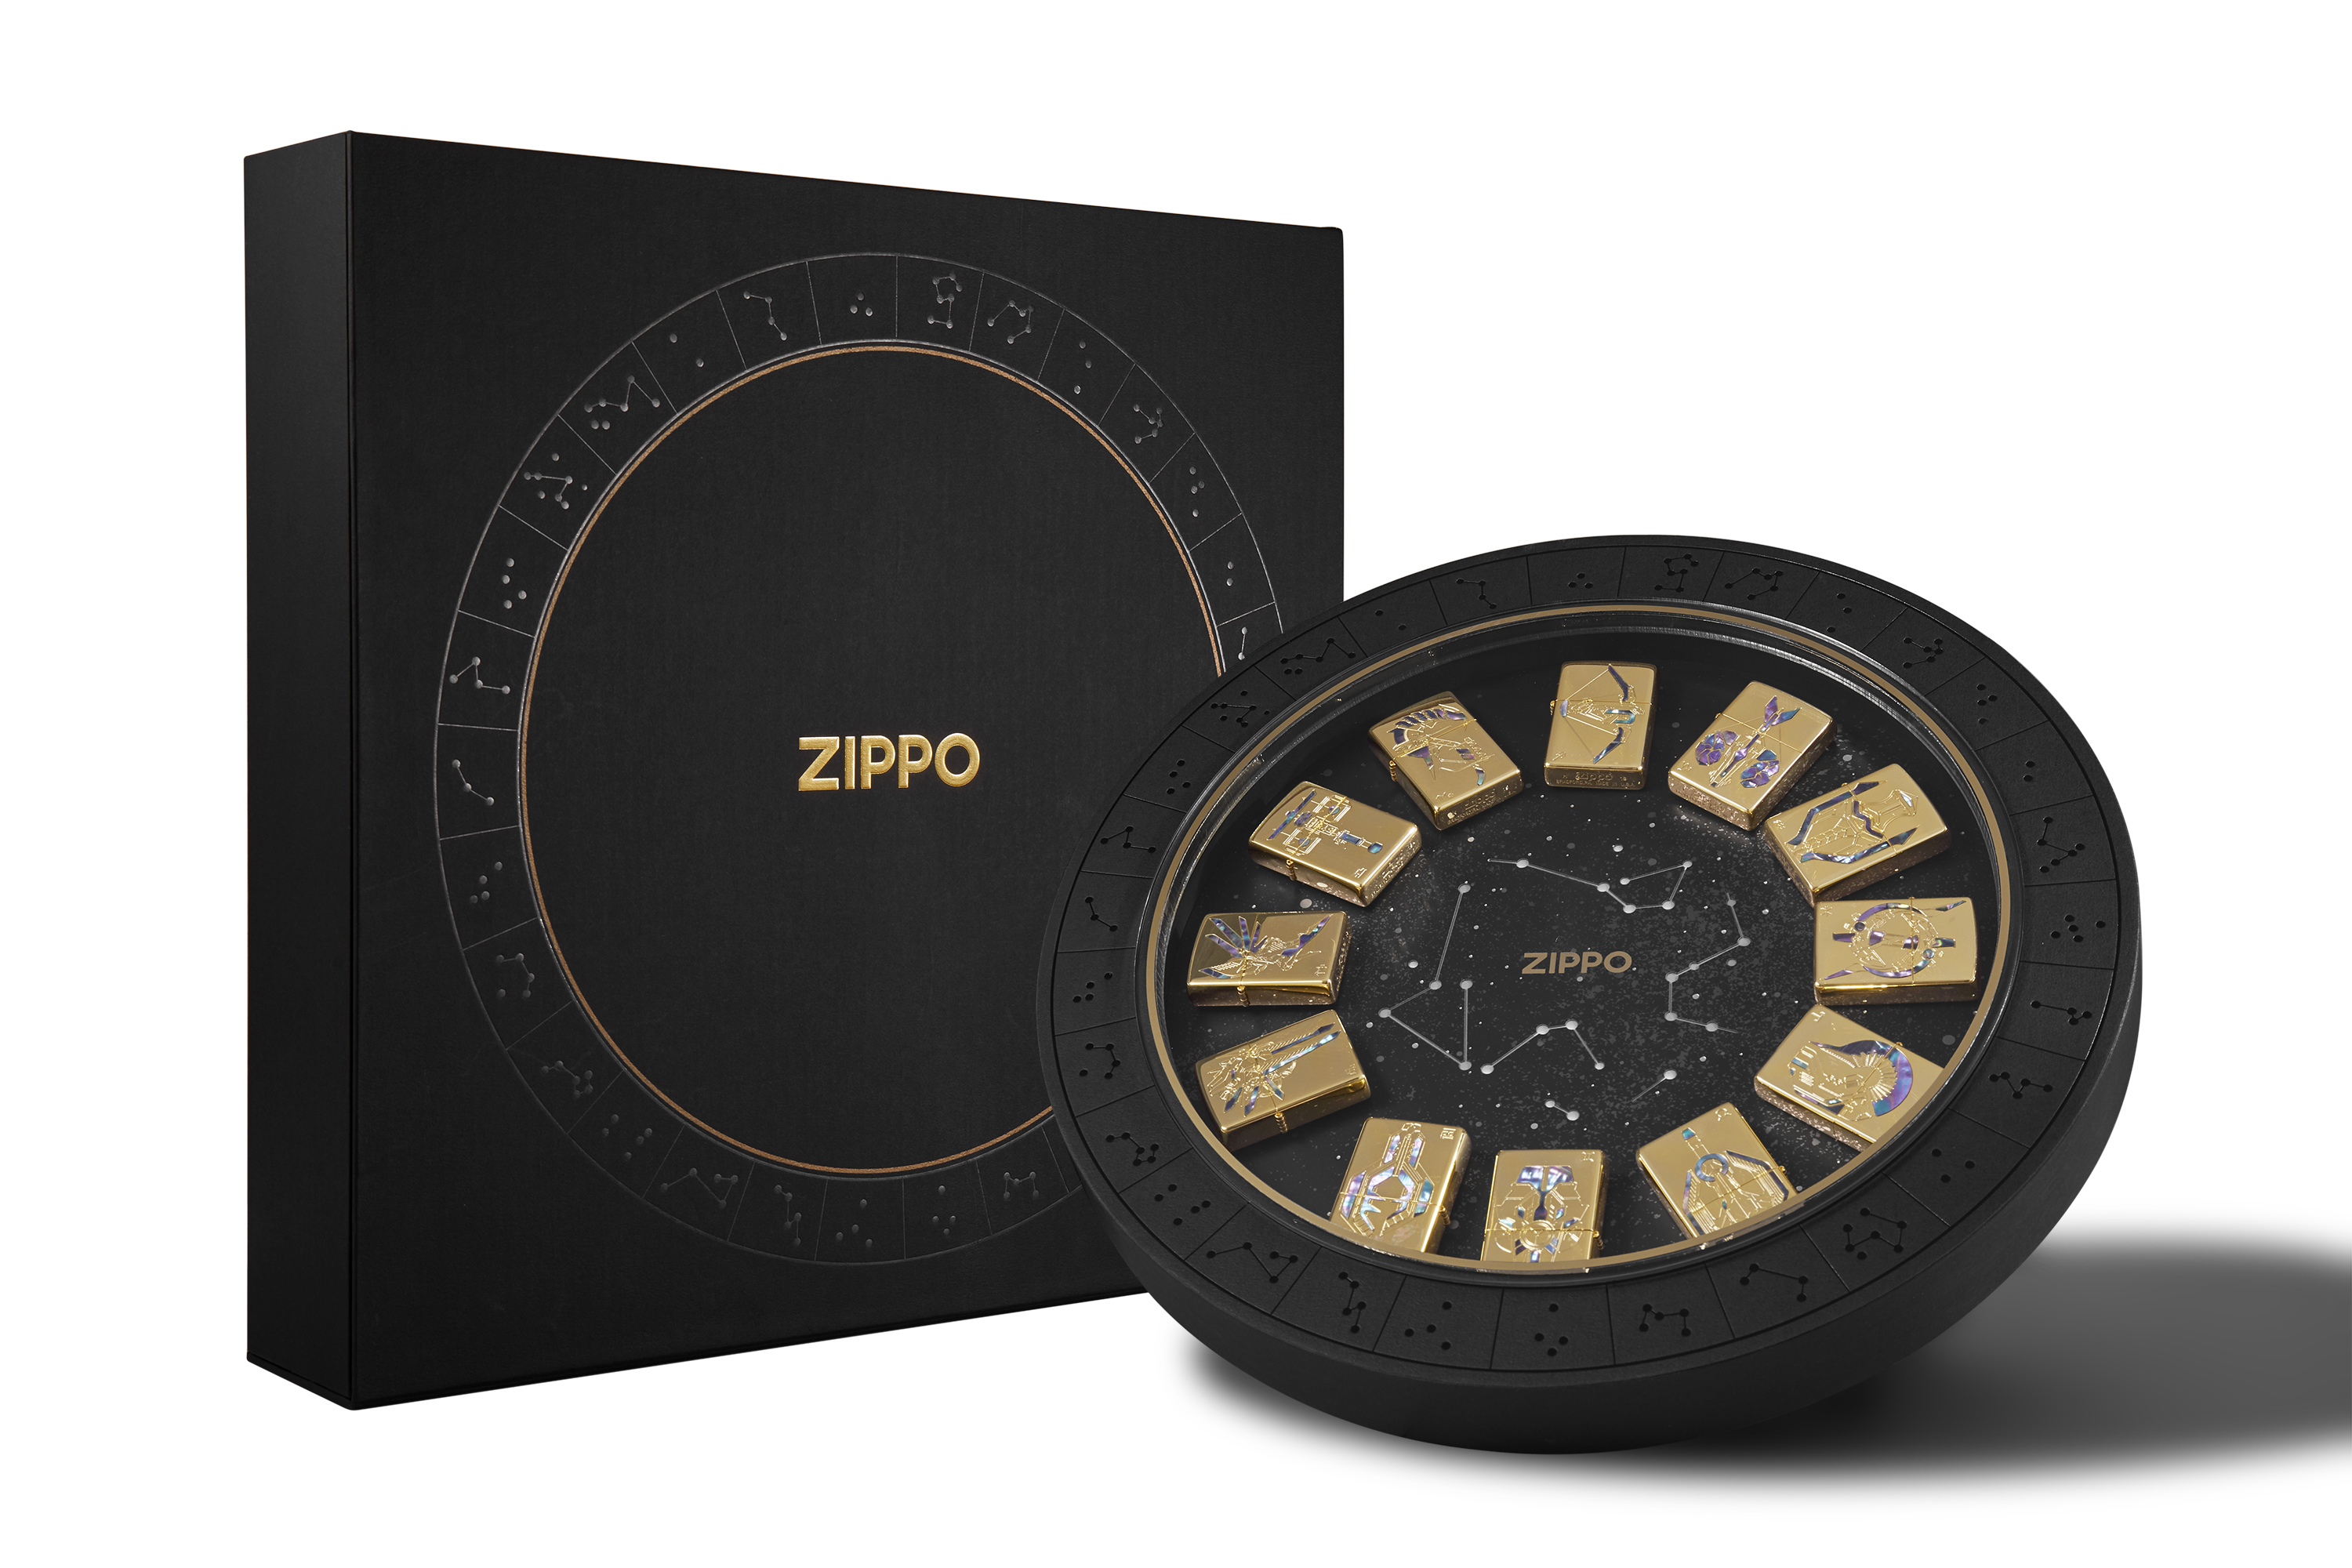 iF Design - Zippo constellation limited edition packaging